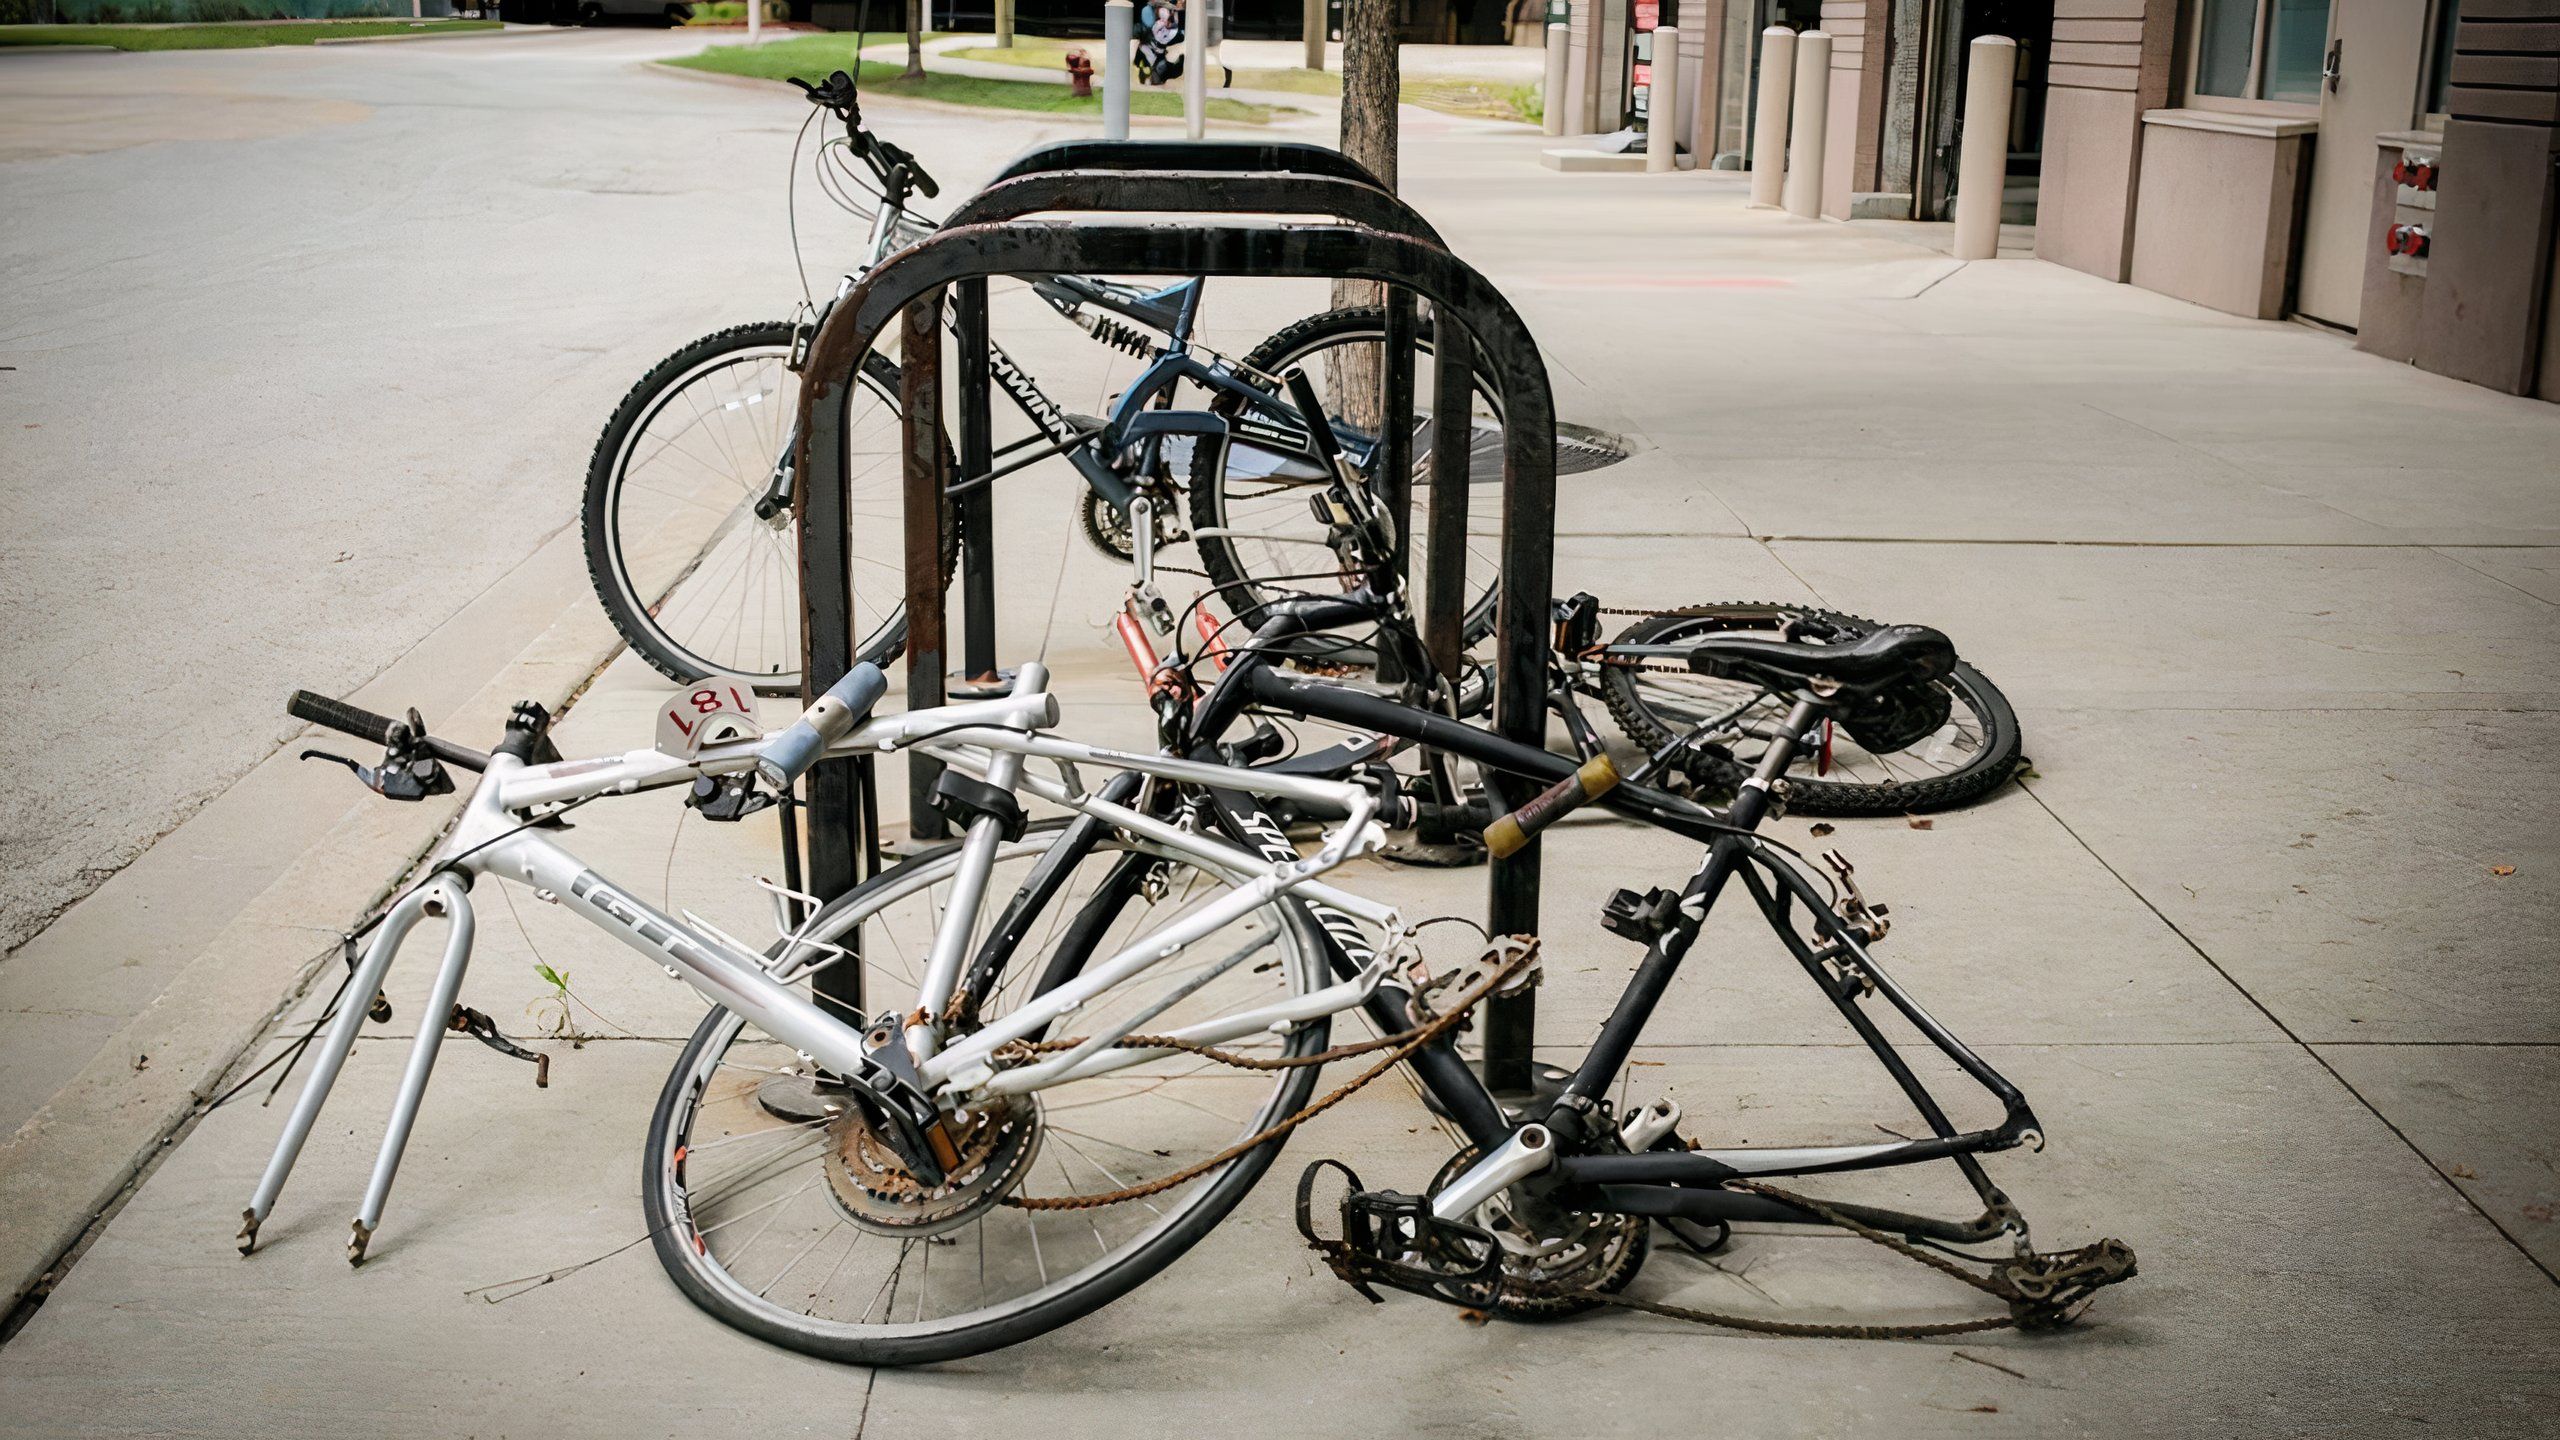 An example of attempted bike theft.